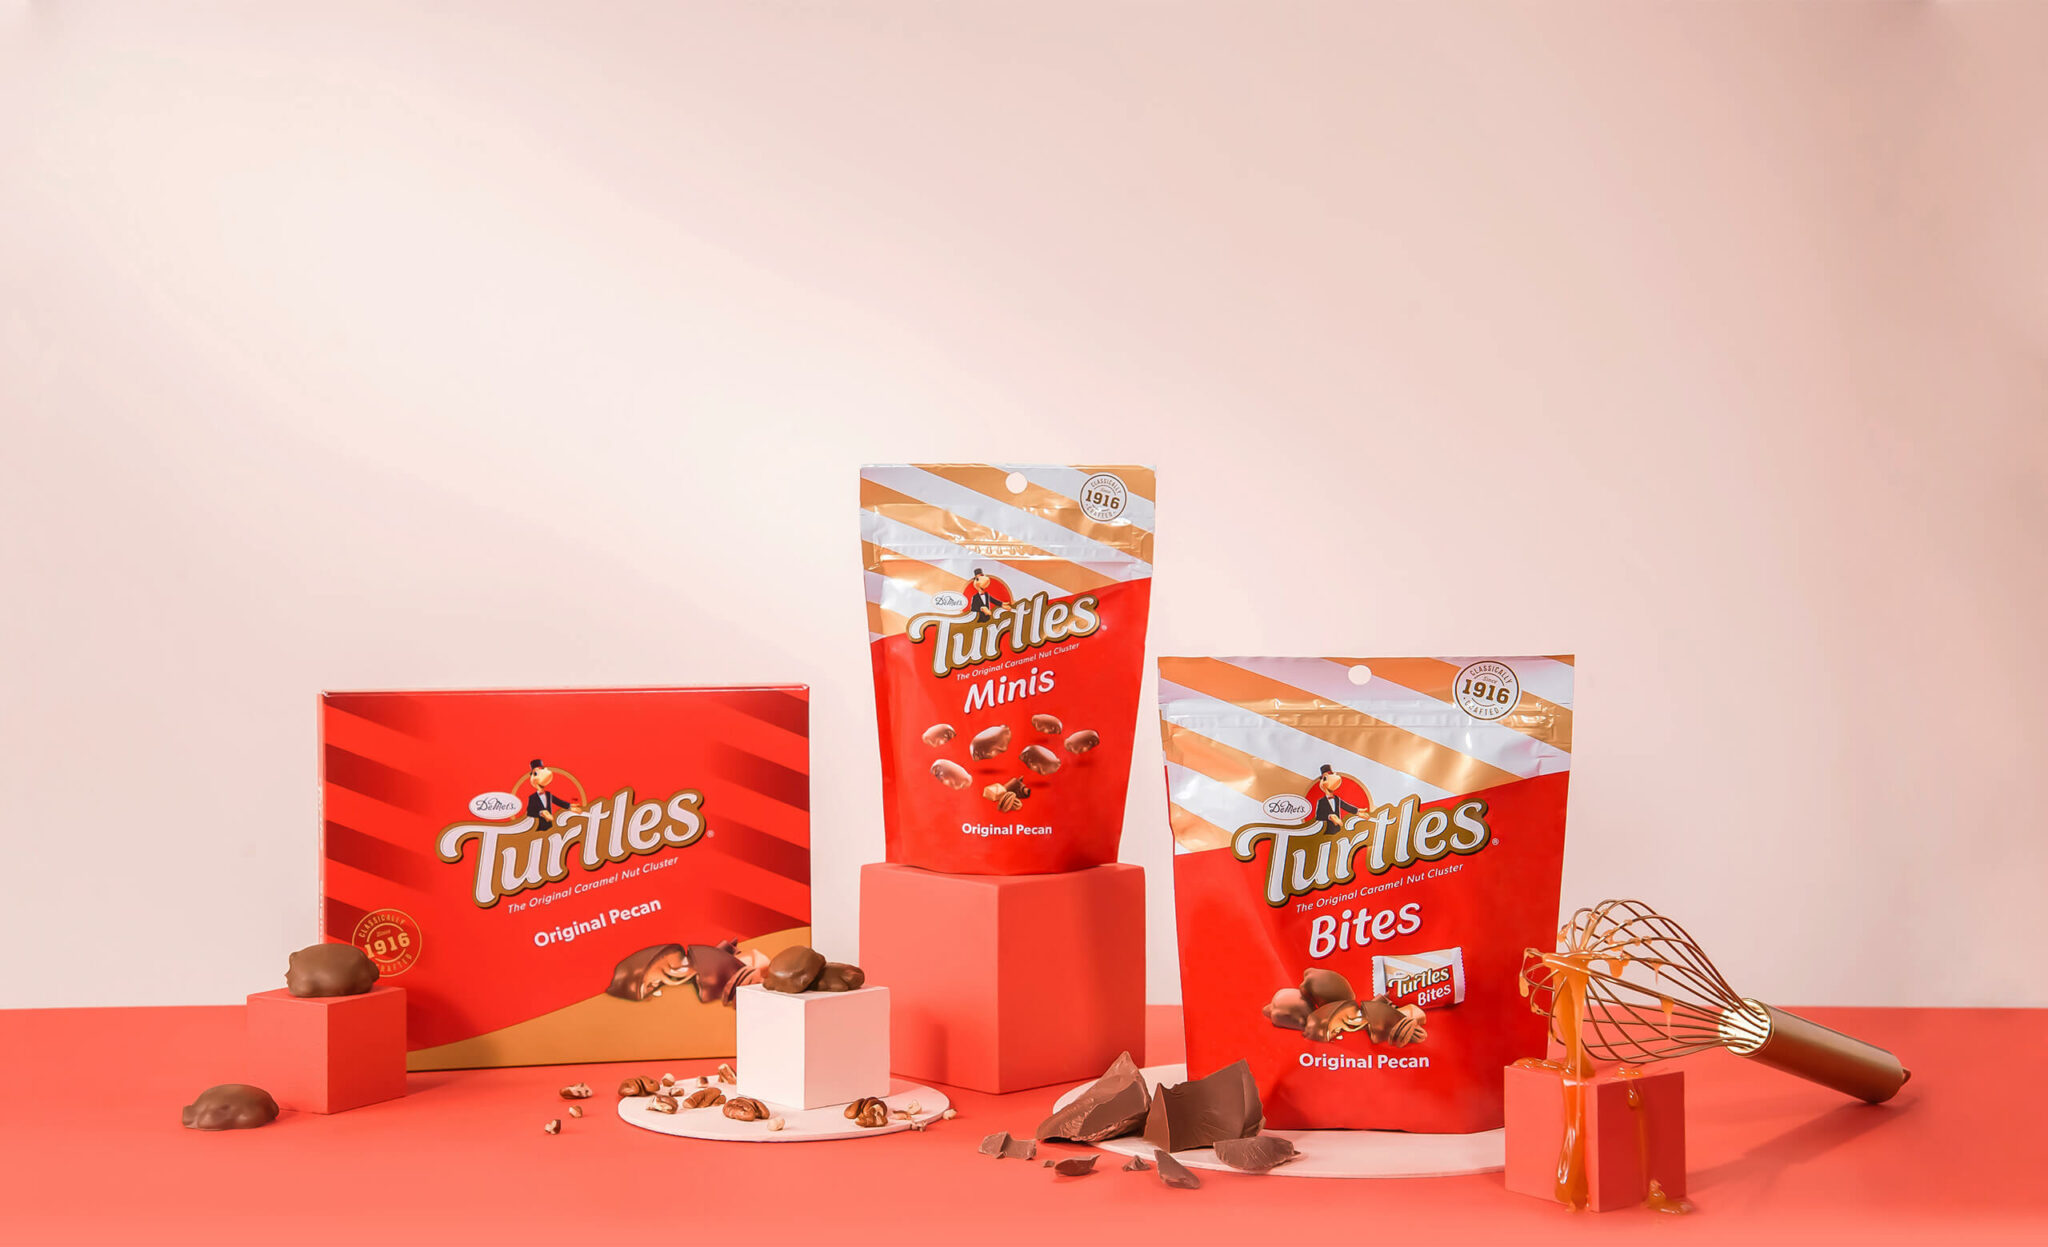 Image of a gift box and bags of Demet's milk chocolate turtles